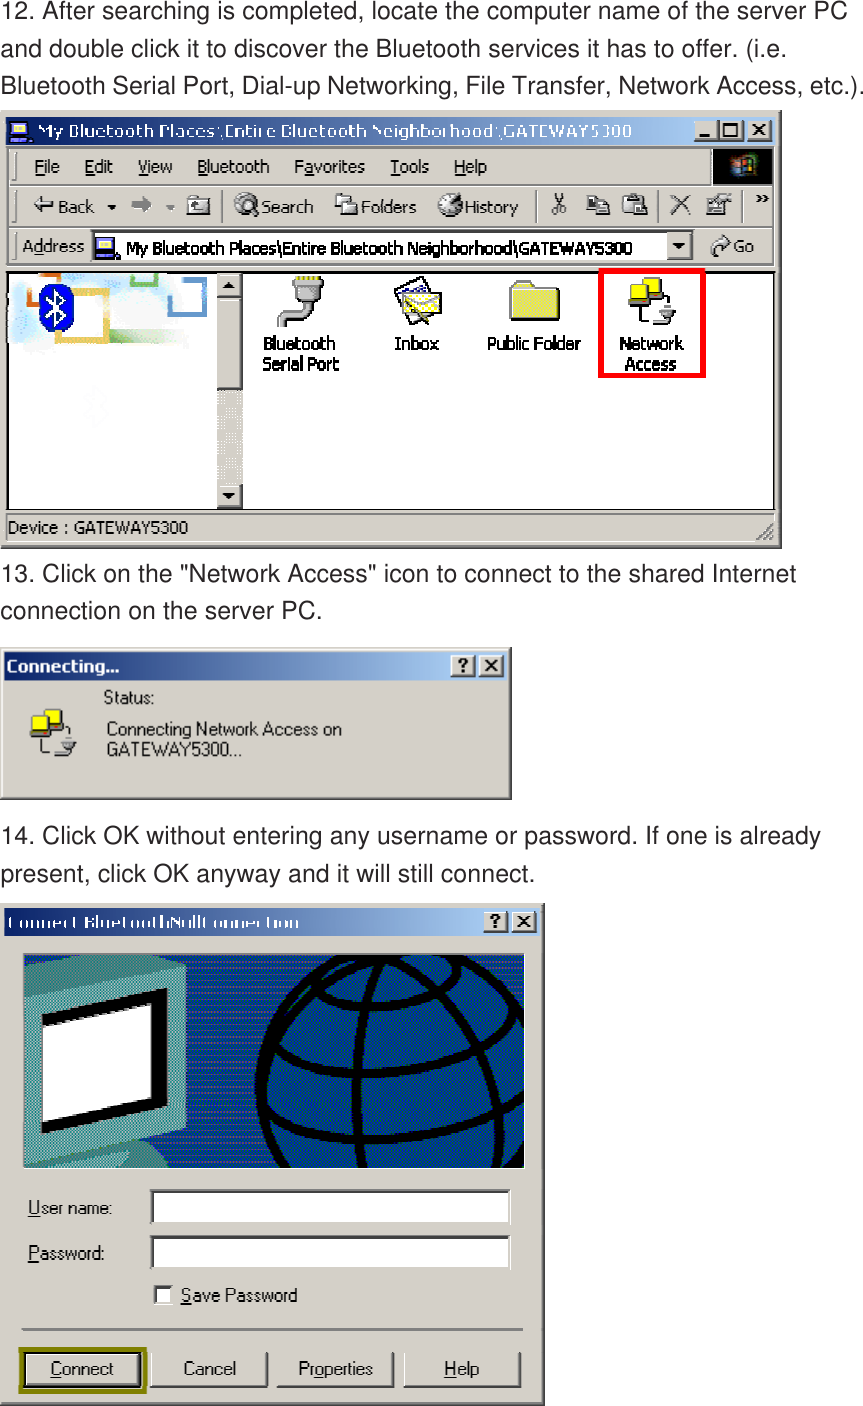 12. After searching is completed, locate the computer name of the server PC and double click it to discover the Bluetooth services it has to offer. (i.e. Bluetooth Serial Port, Dial-up Networking, File Transfer, Network Access, etc.).  13. Click on the &quot;Network Access&quot; icon to connect to the shared Internet connection on the server PC.  14. Click OK without entering any username or password. If one is already present, click OK anyway and it will still connect.  